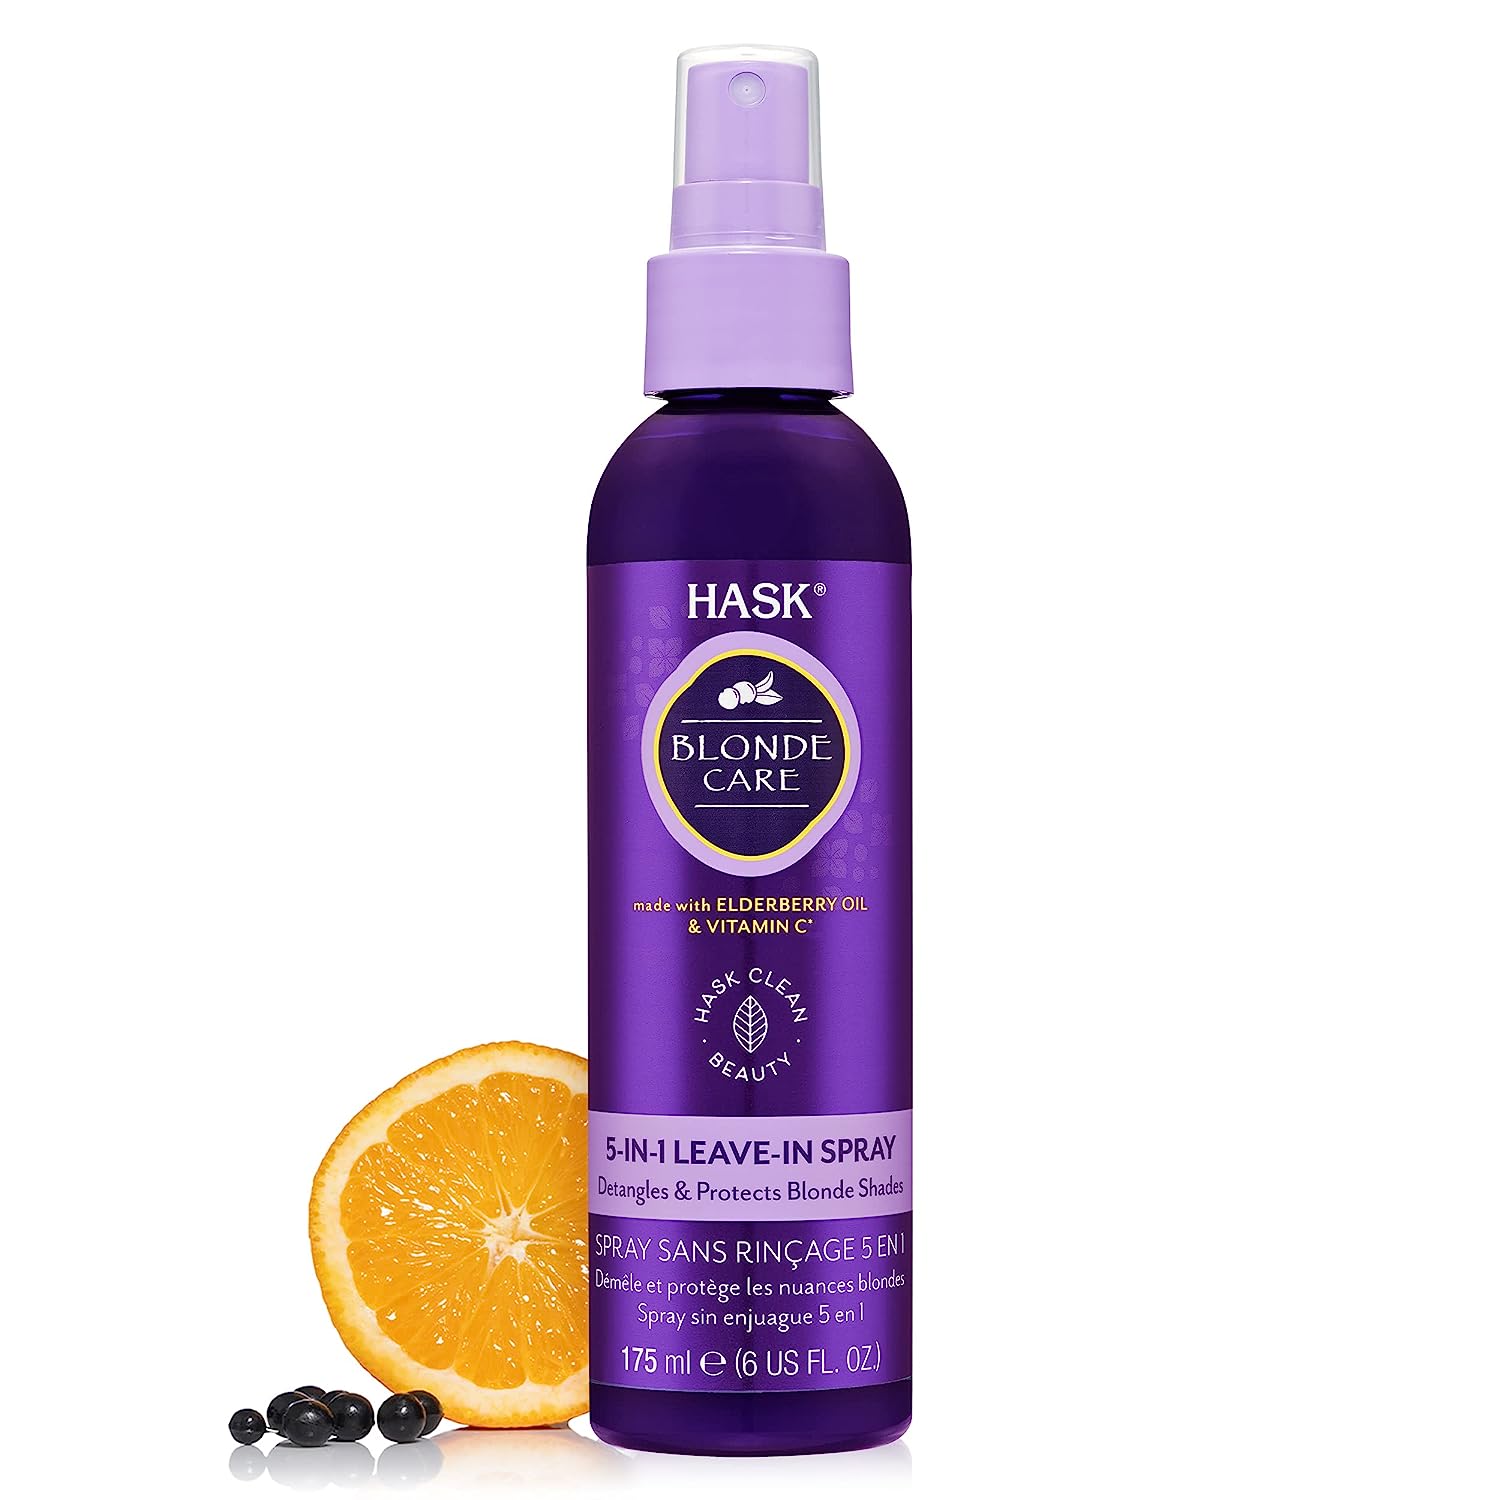 HASK BLONDE CARE 5-IN-1 Leave-In Spray Conditioner 2 [...]